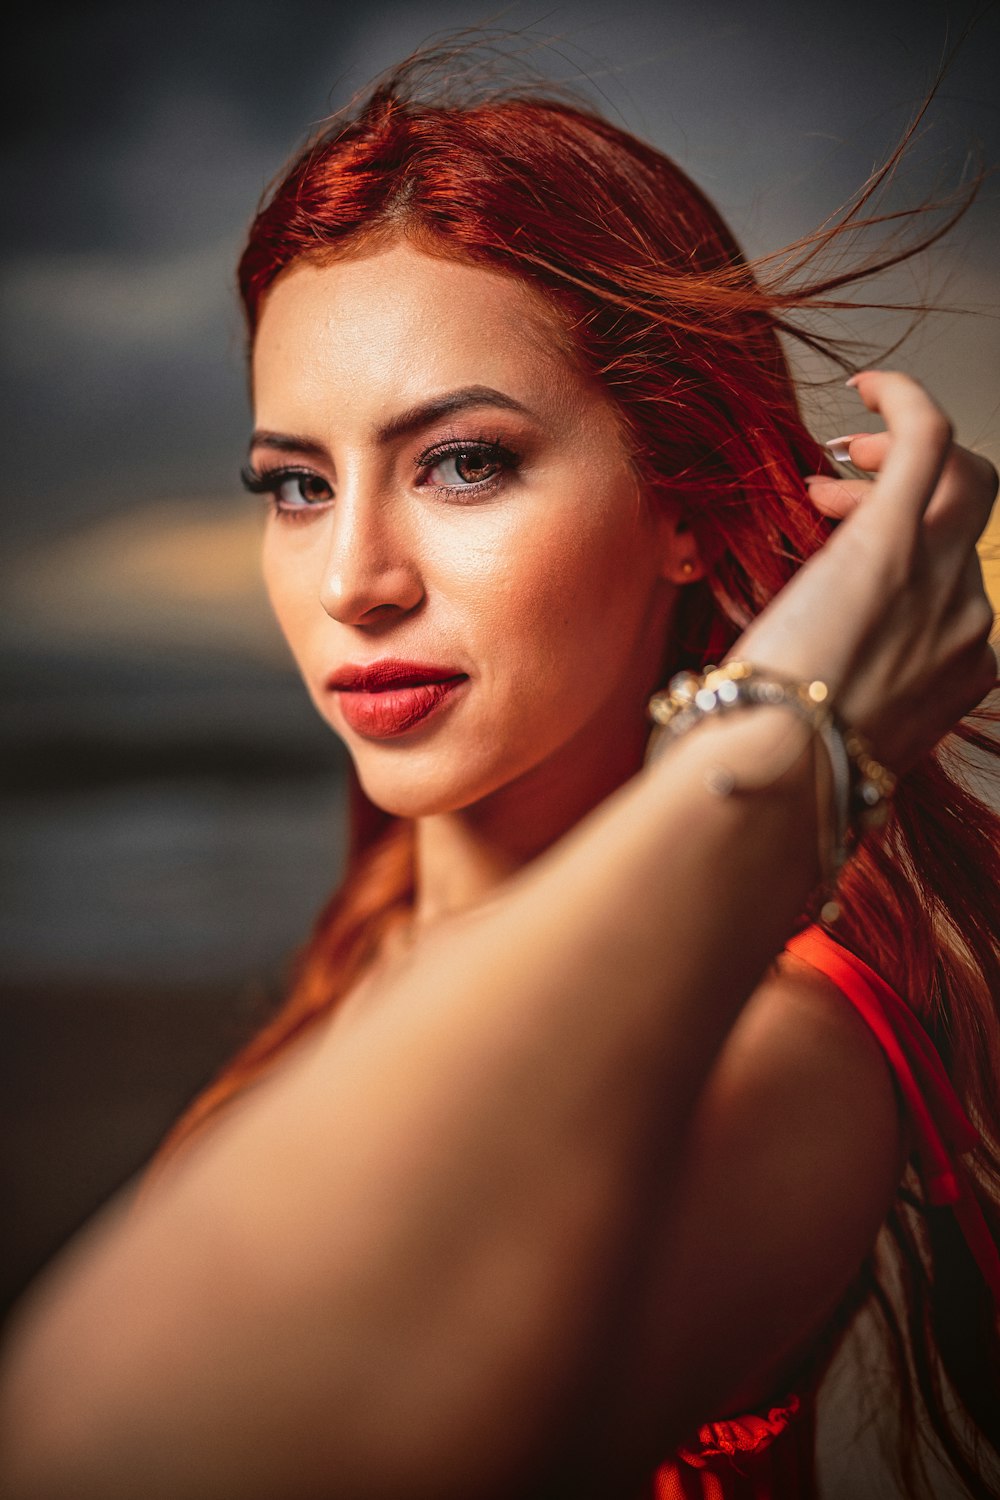 a woman with red hair is posing for a picture